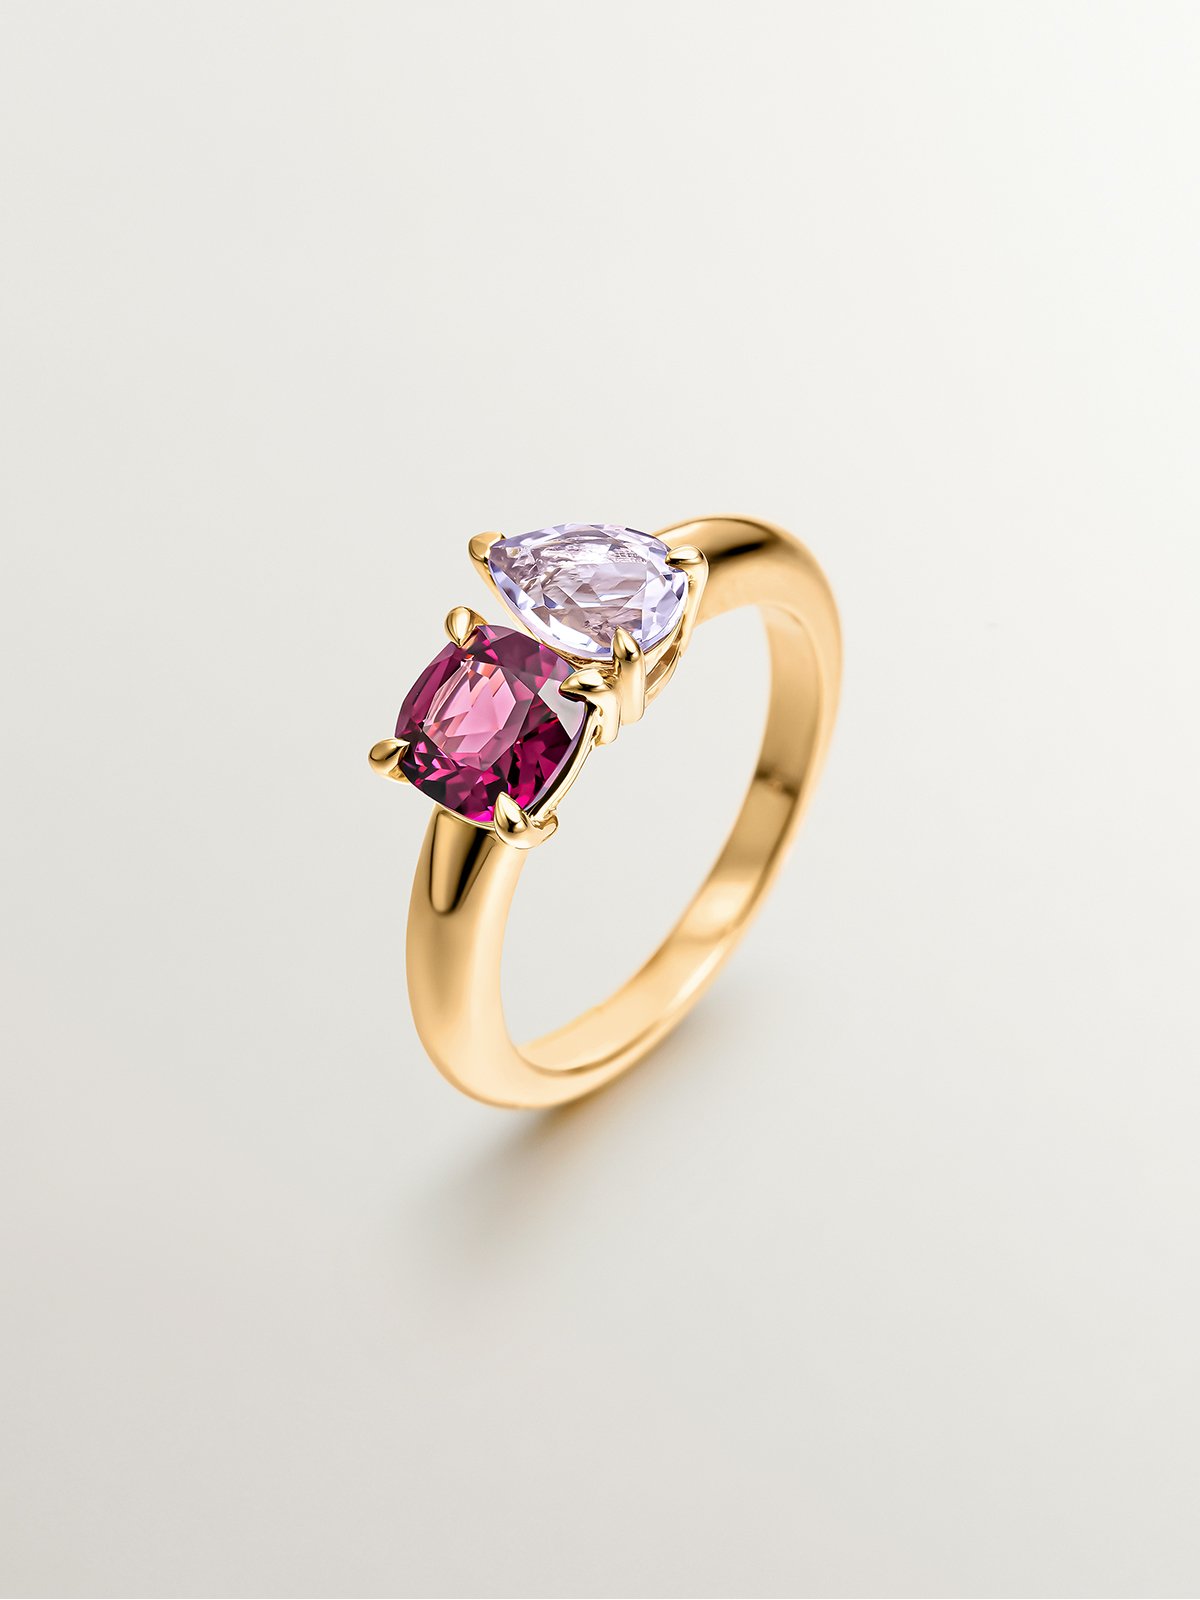 18K yellow gold plated 925 silver ring with rhodolite and pink amethyst